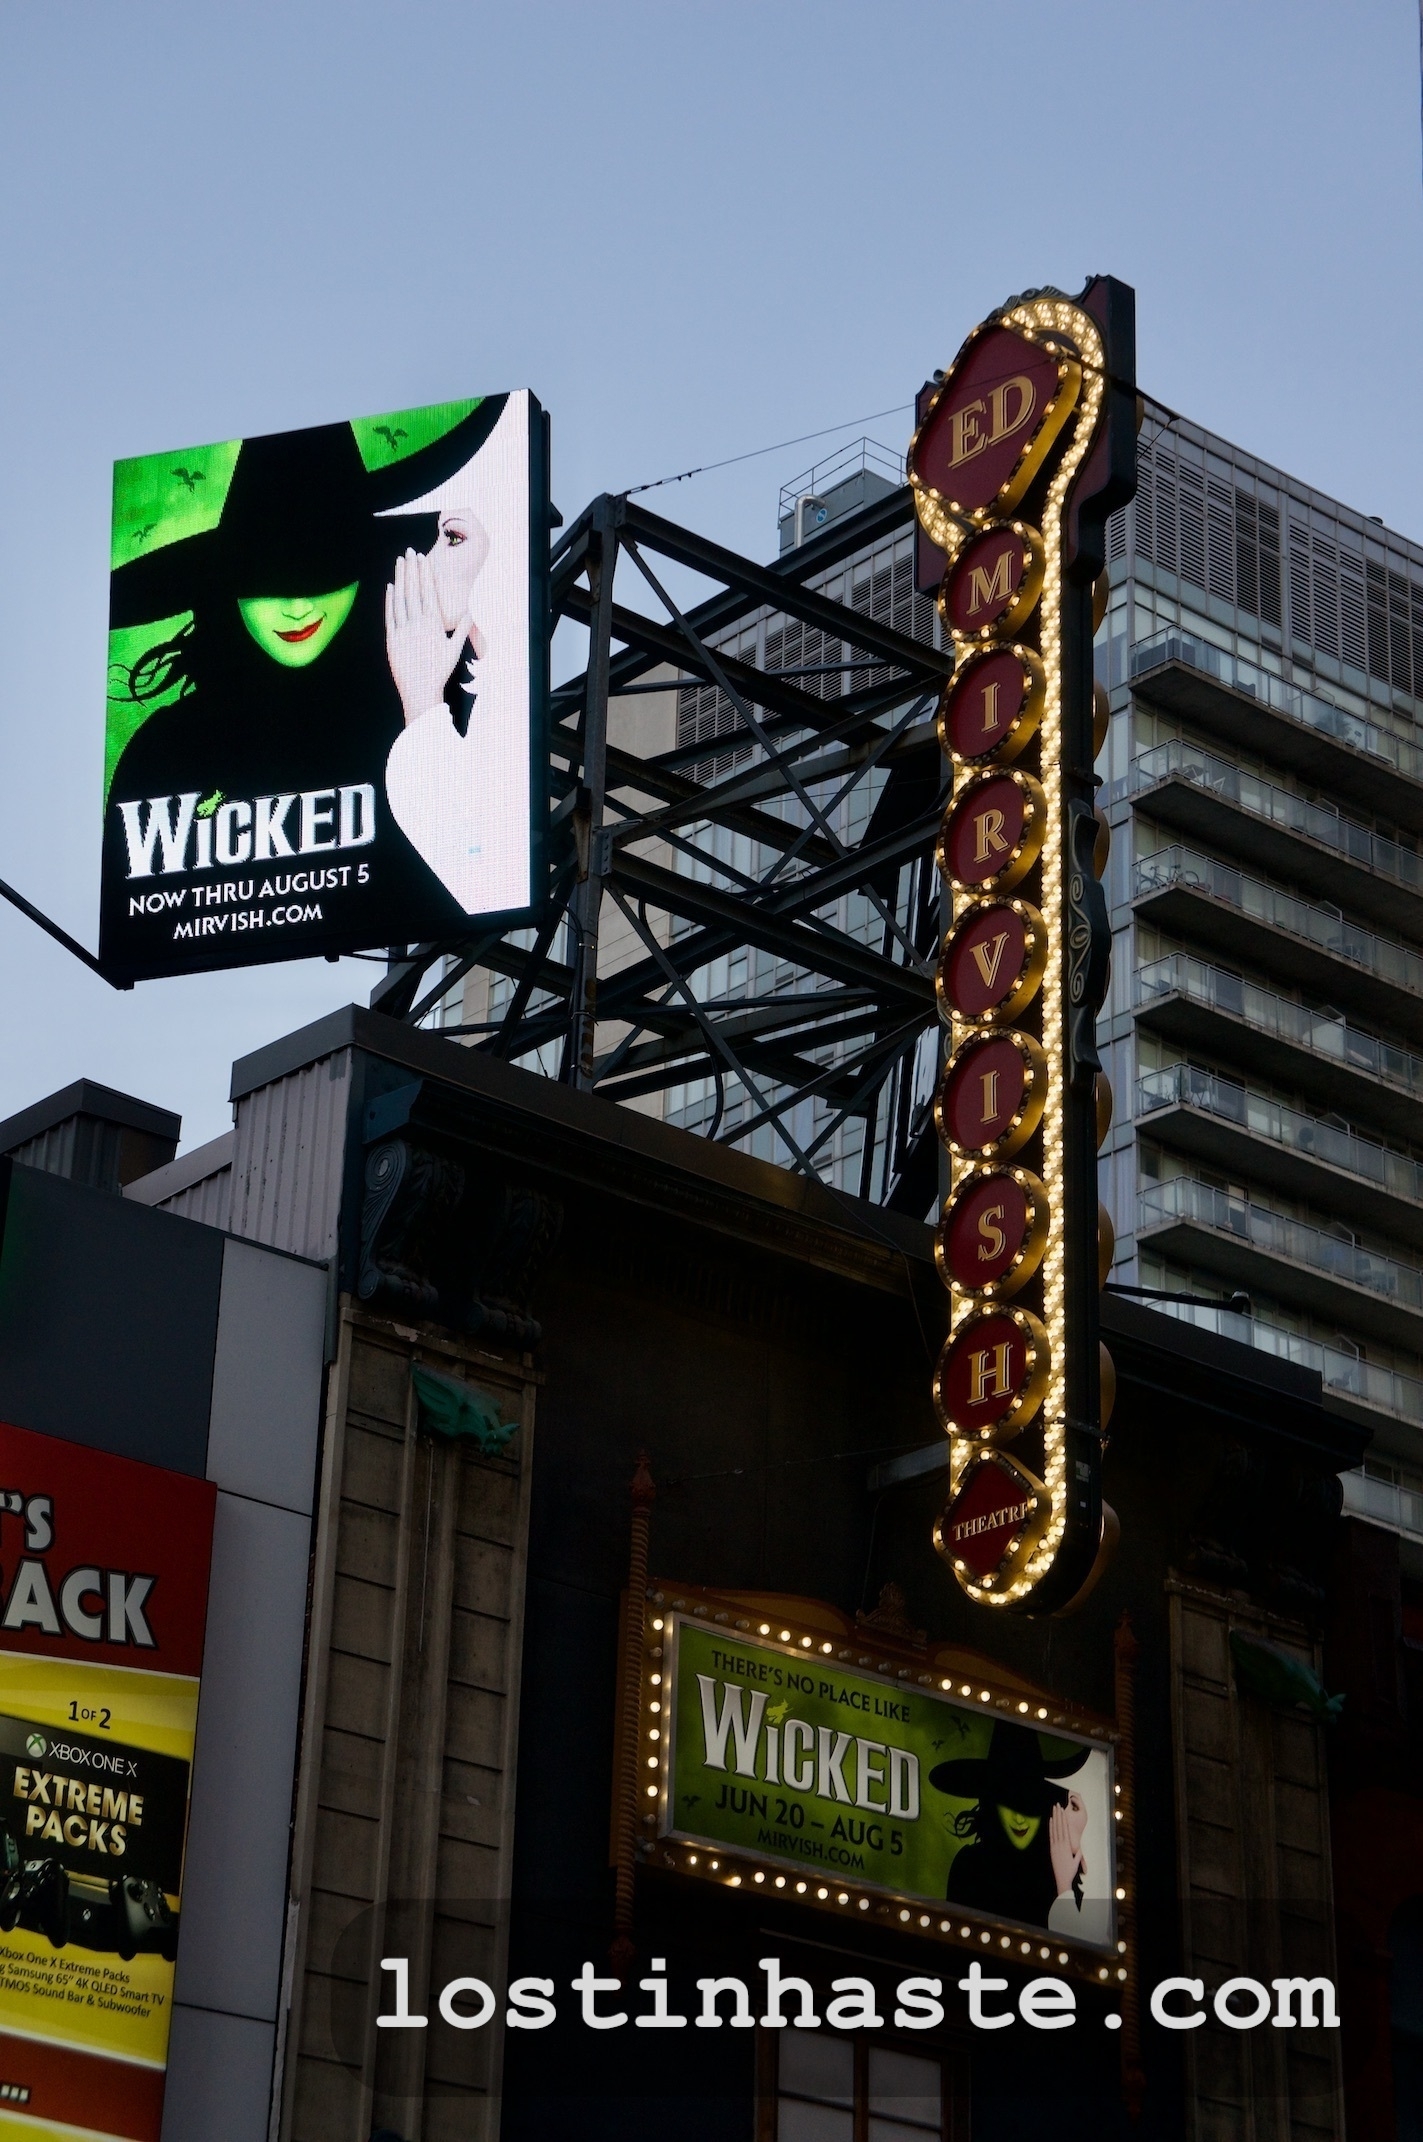 Digital billboard and theater marquee promote the musical 'Wicked' against an urban background; the URL 'mirvish.com' and dates 'NOW THRU August 5' are visible. Lower corner watermark reads 'lostinahaste.com'.